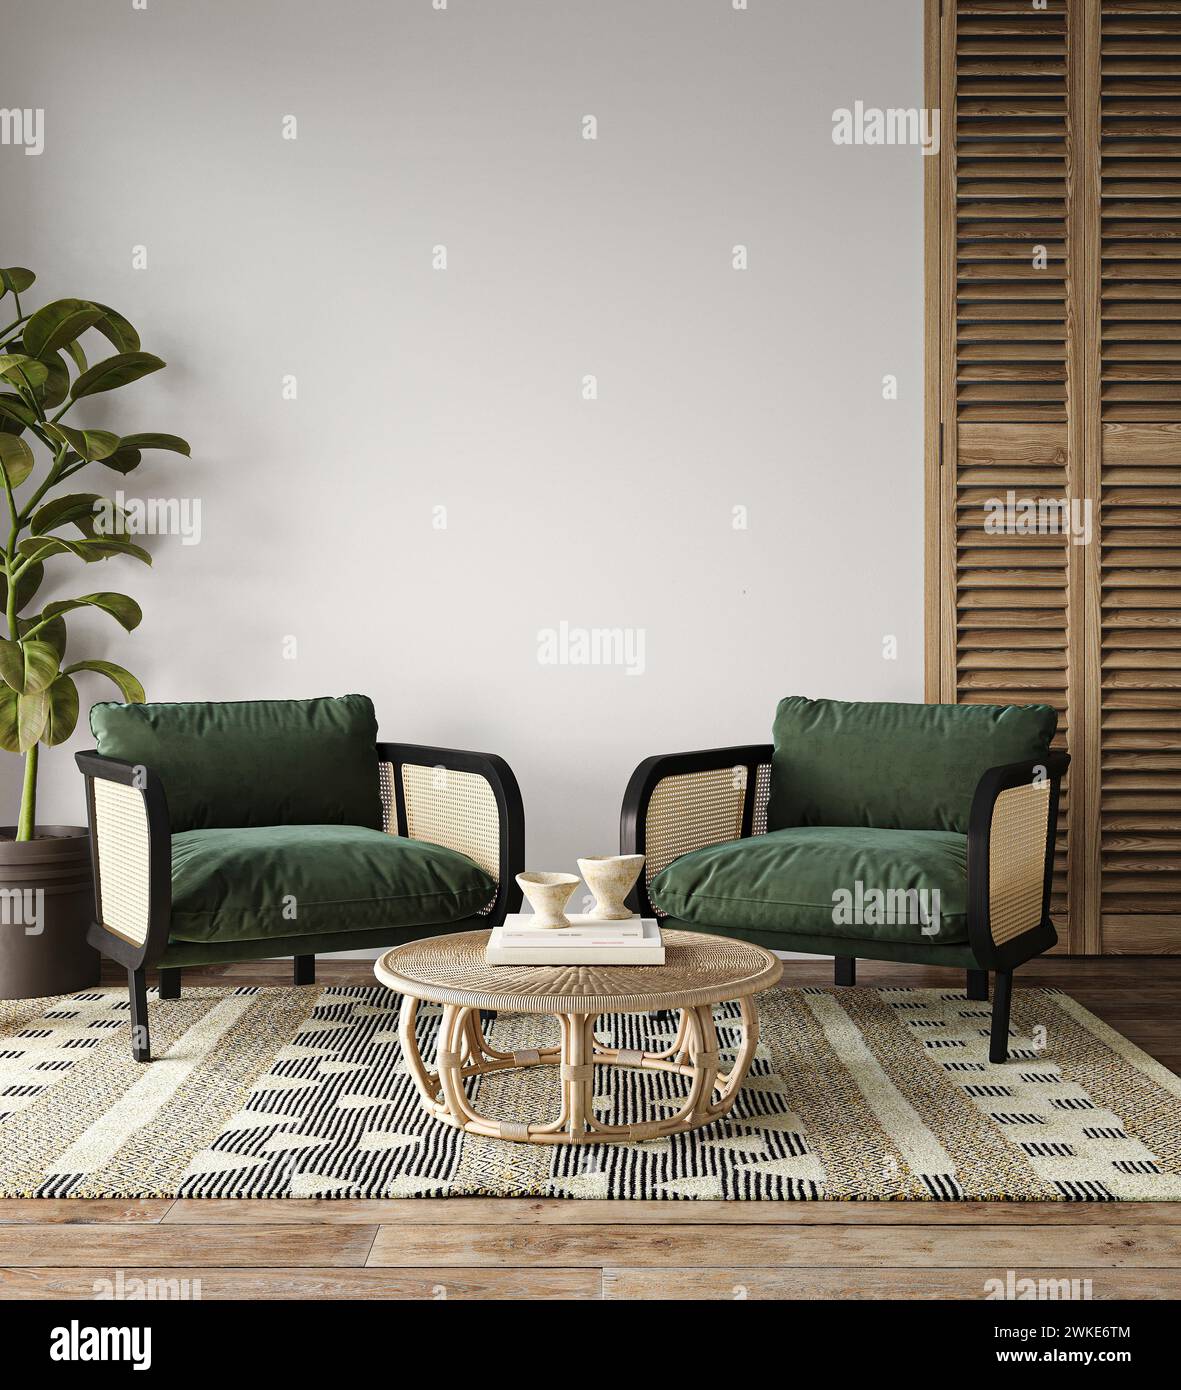 Modern living room interior with comfortable armchairs and geometric rug Stock Photo